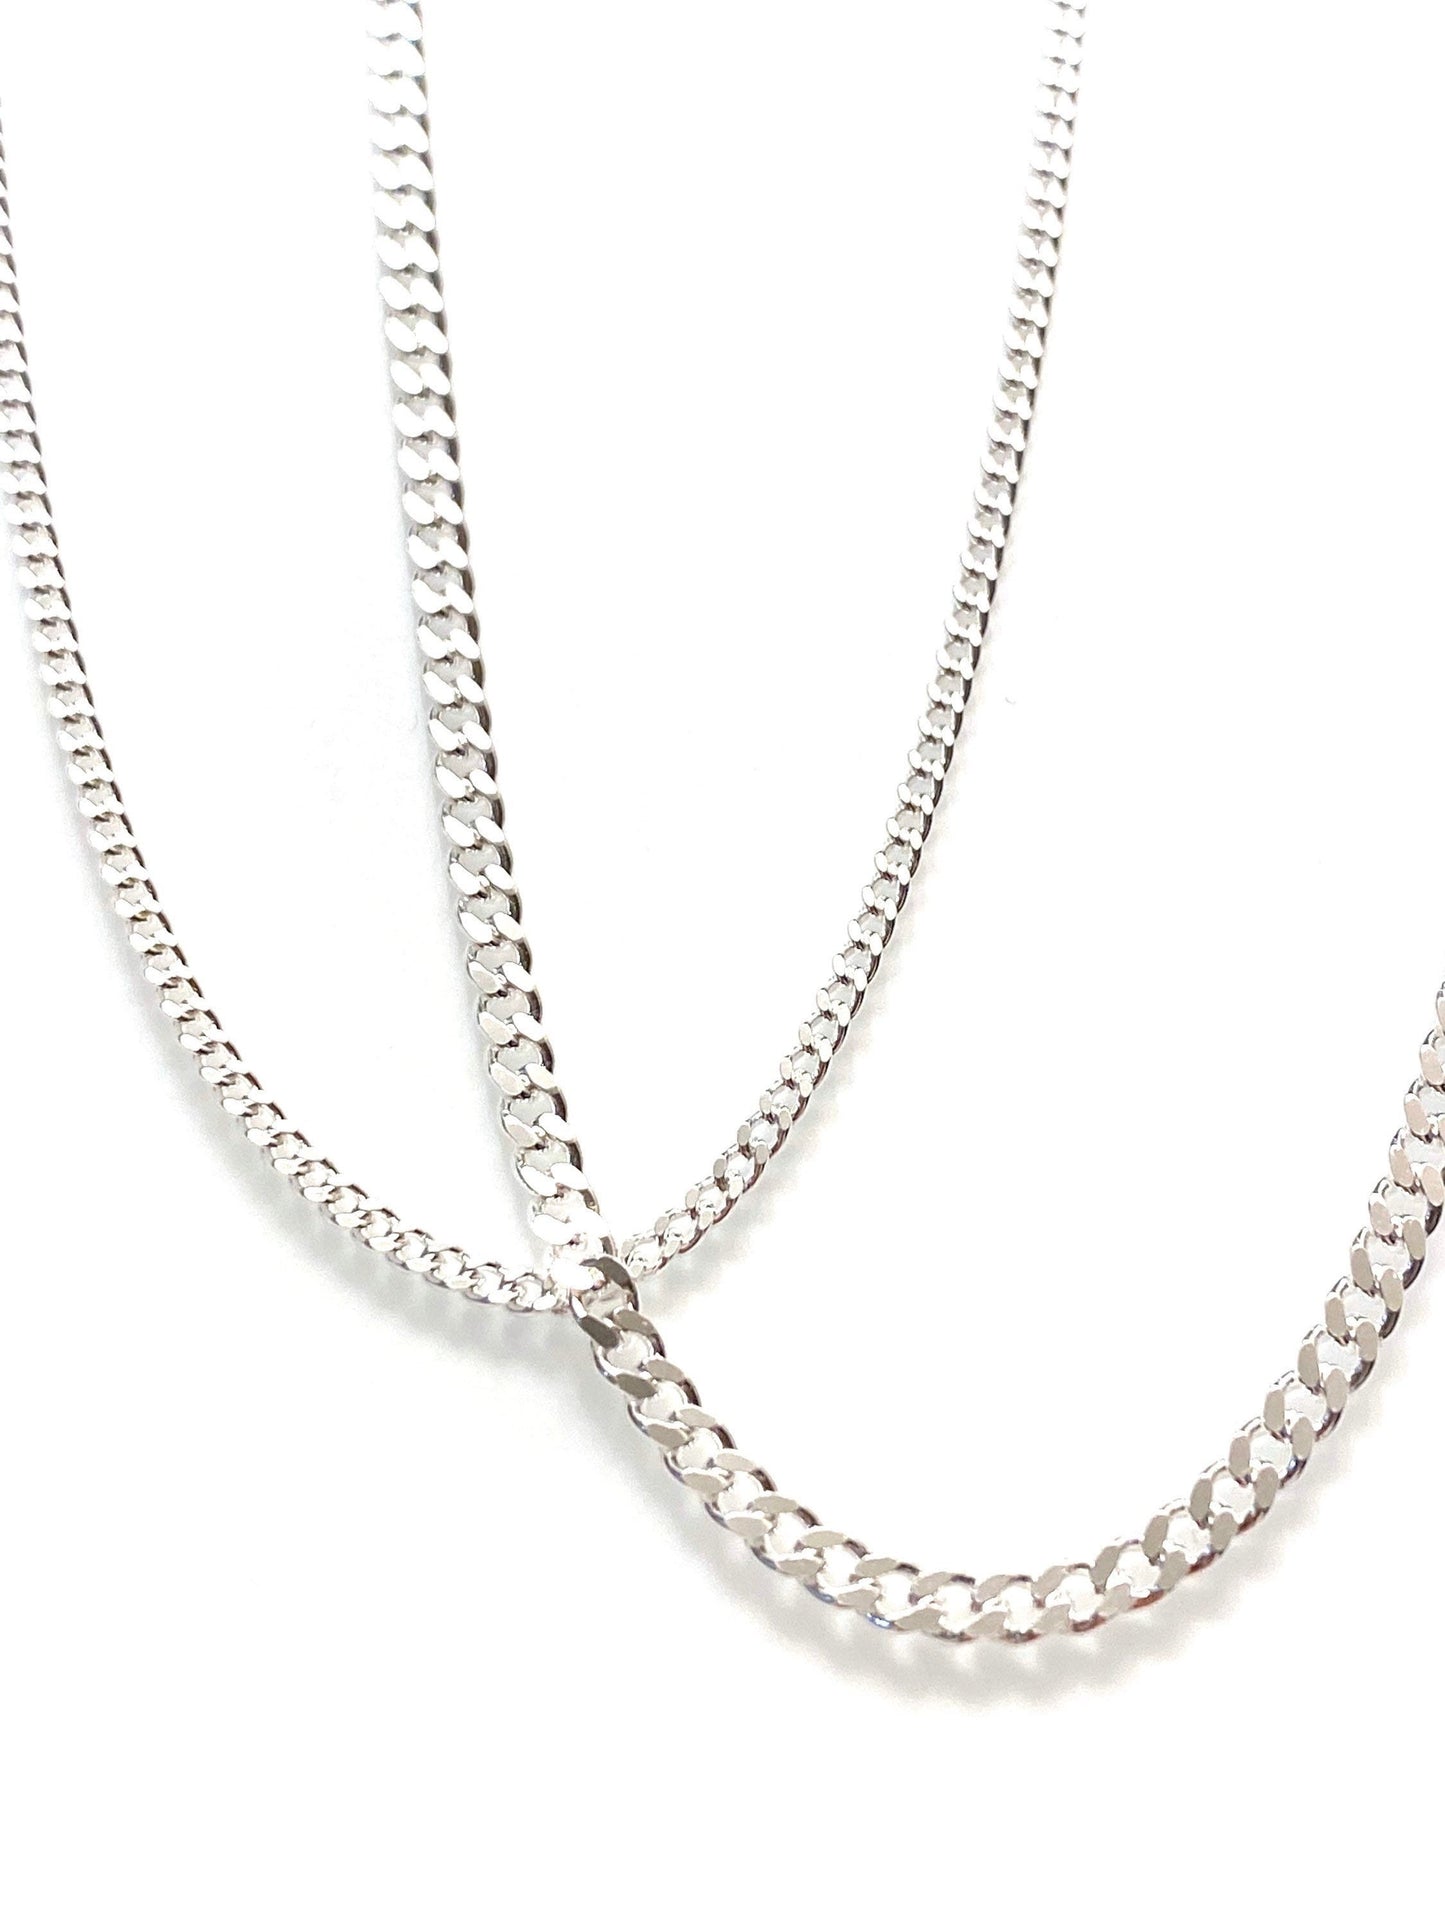 Sterling silver Italian curb chain (2 and 3mm options available)